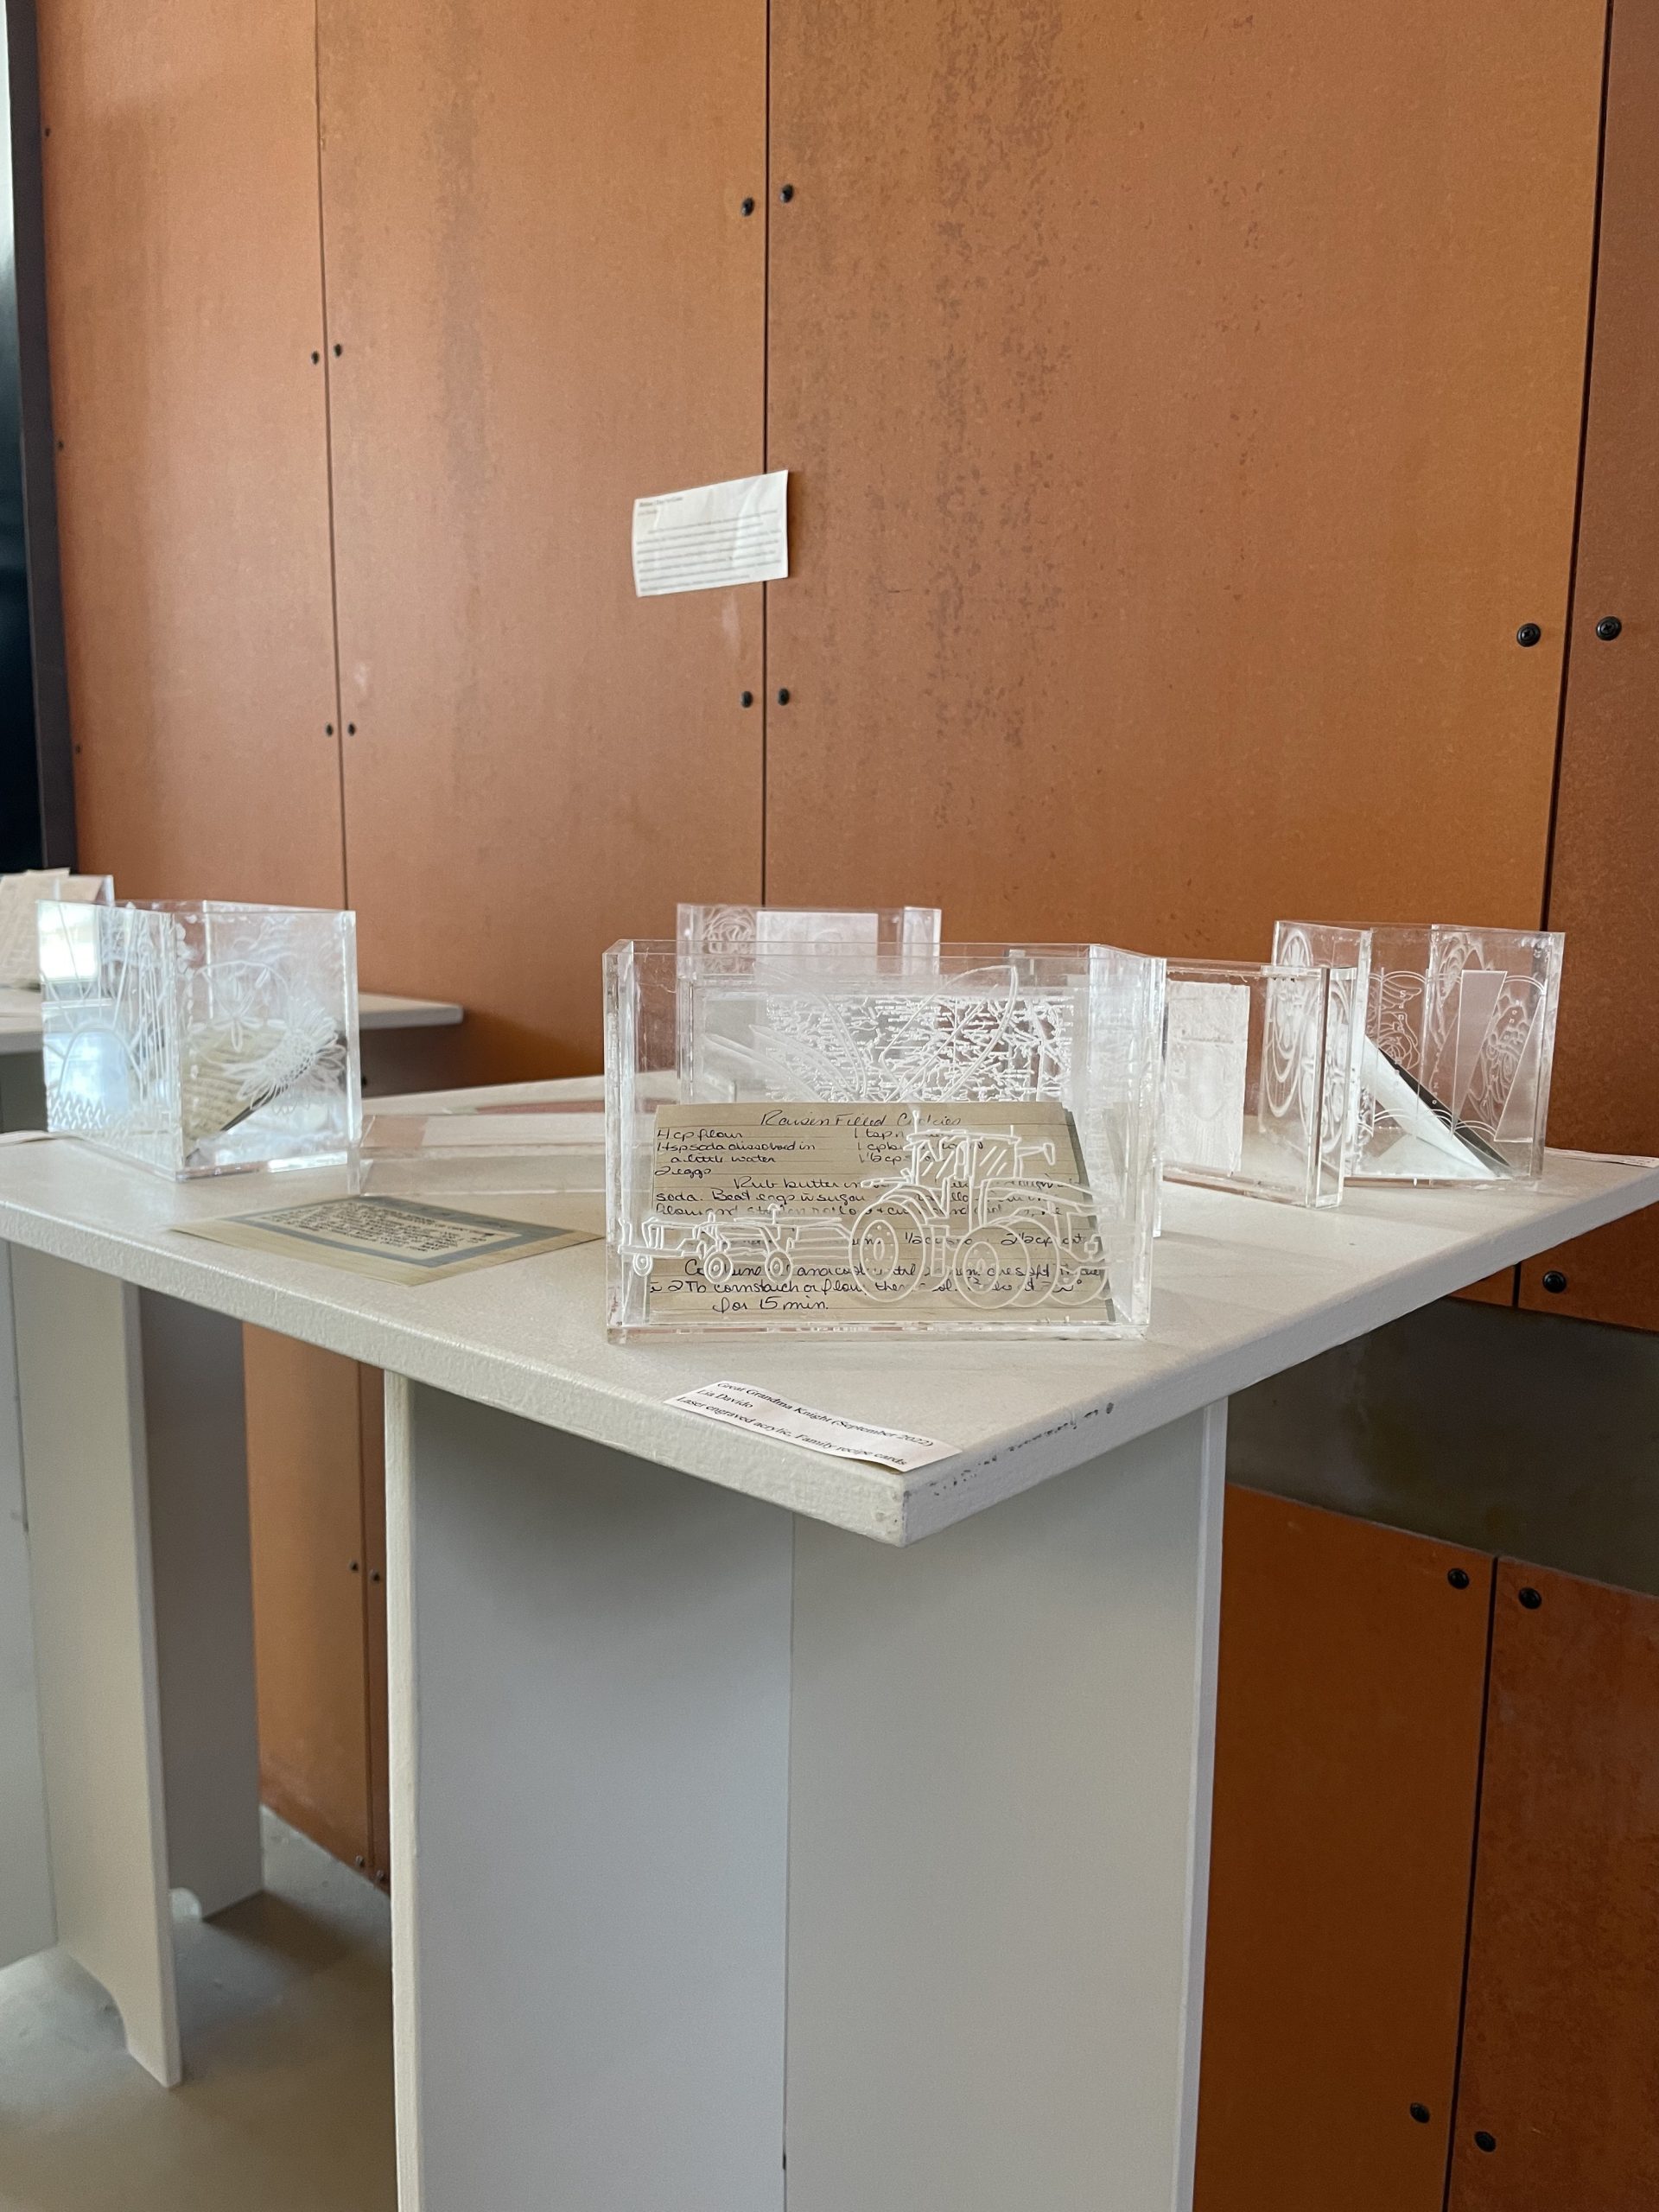 Lia Davido Before they're gone exhibition photo 2 - additional recipes in clear acrylic containers on a white pedestal.